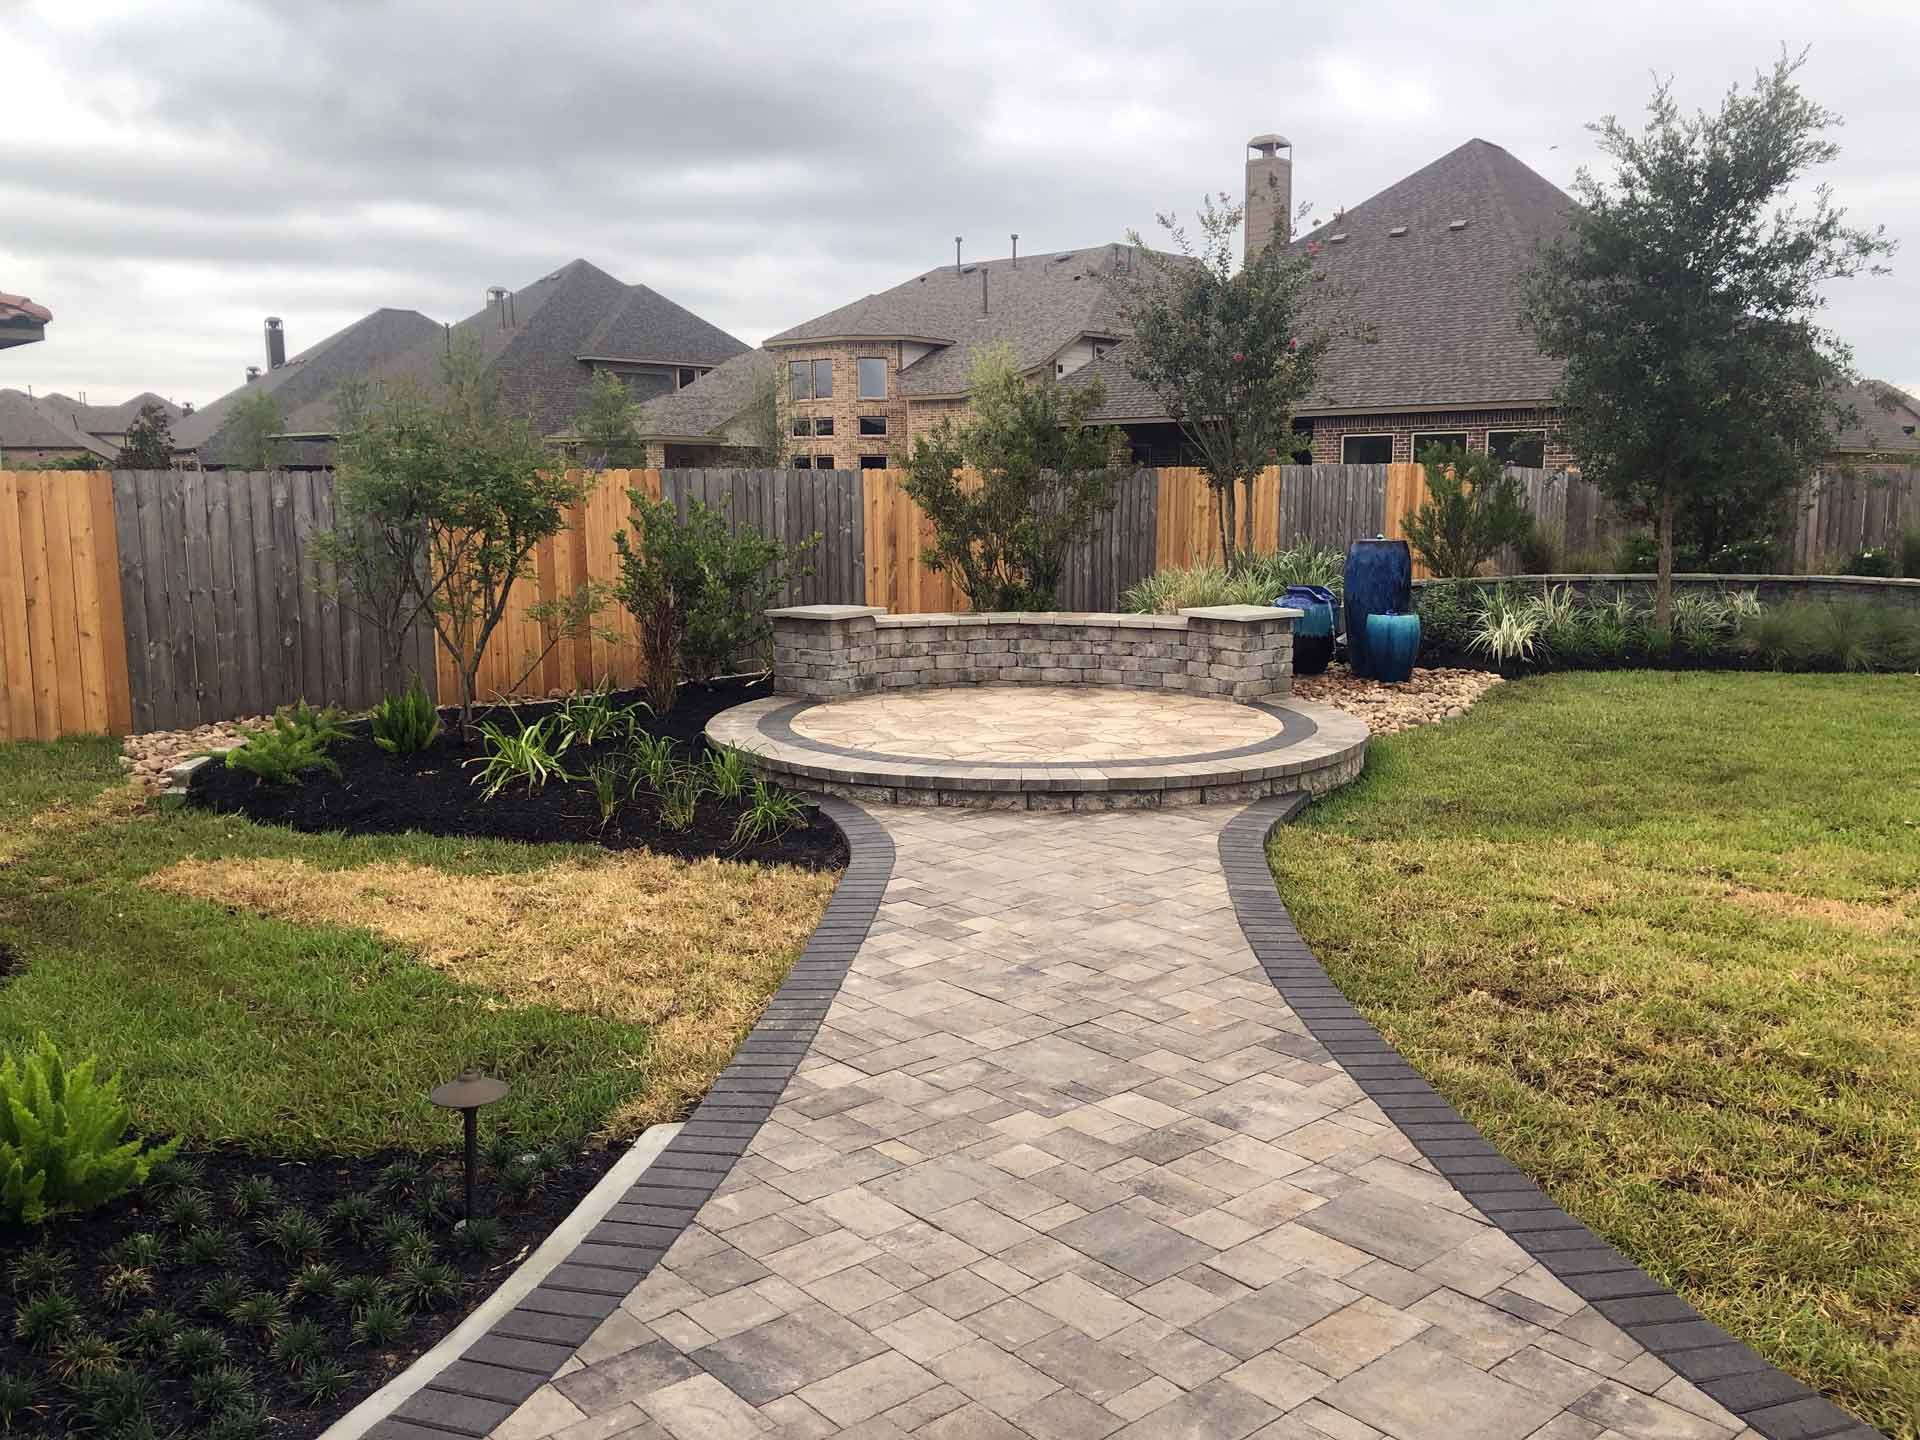 Wide paver pathway with a paver circular patio at the end